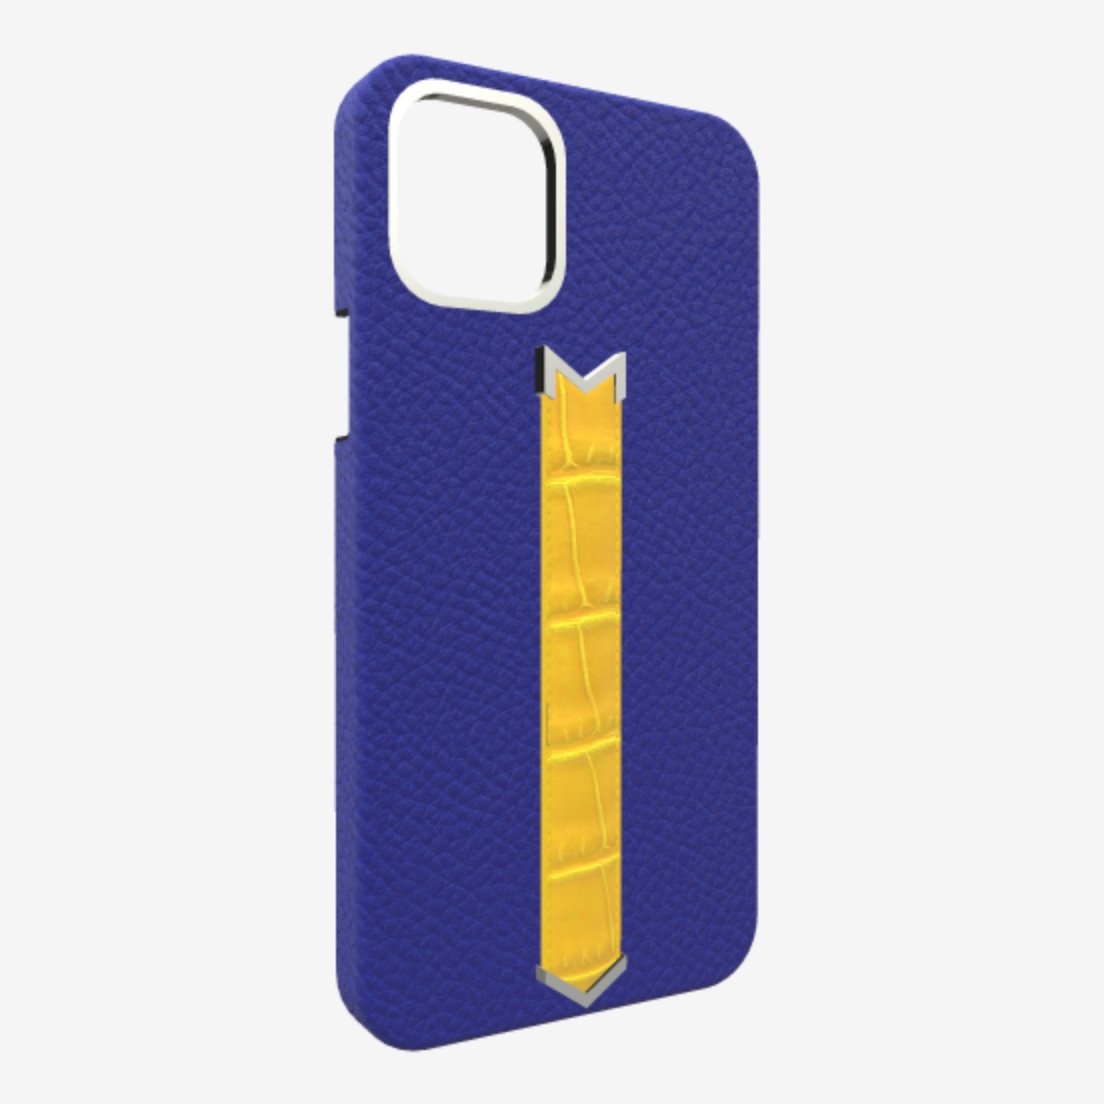 Silver Finger Strap Case for iPhone 13 Pro in Genuine Calfskin and Alligator Electric-Blue Summer-Yellow 